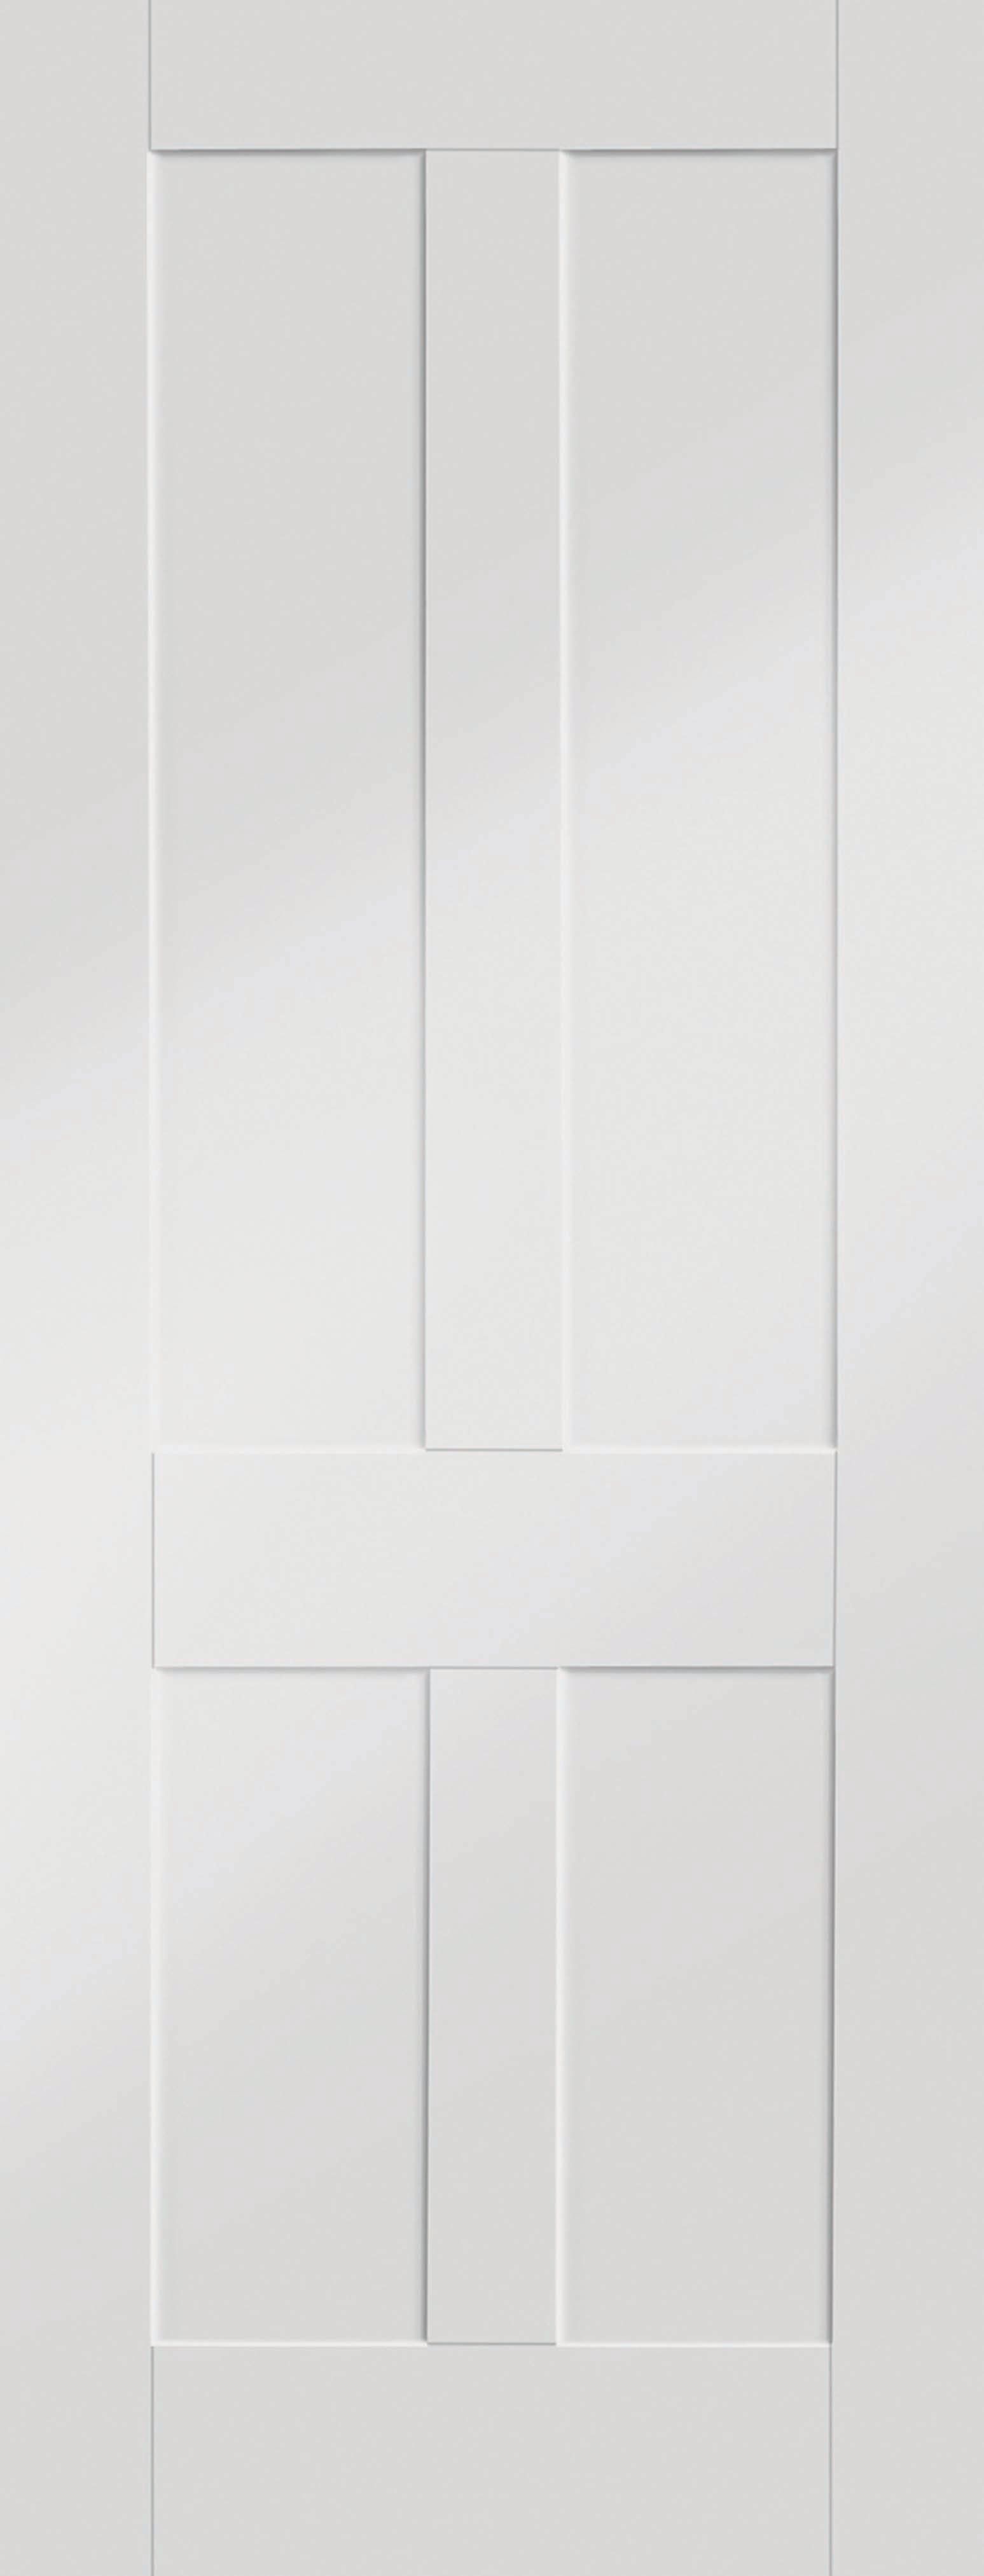 Image of XL Joinery Victorian/Malton White Softwood 4 Panel Internal Door - 1981 x 686mm